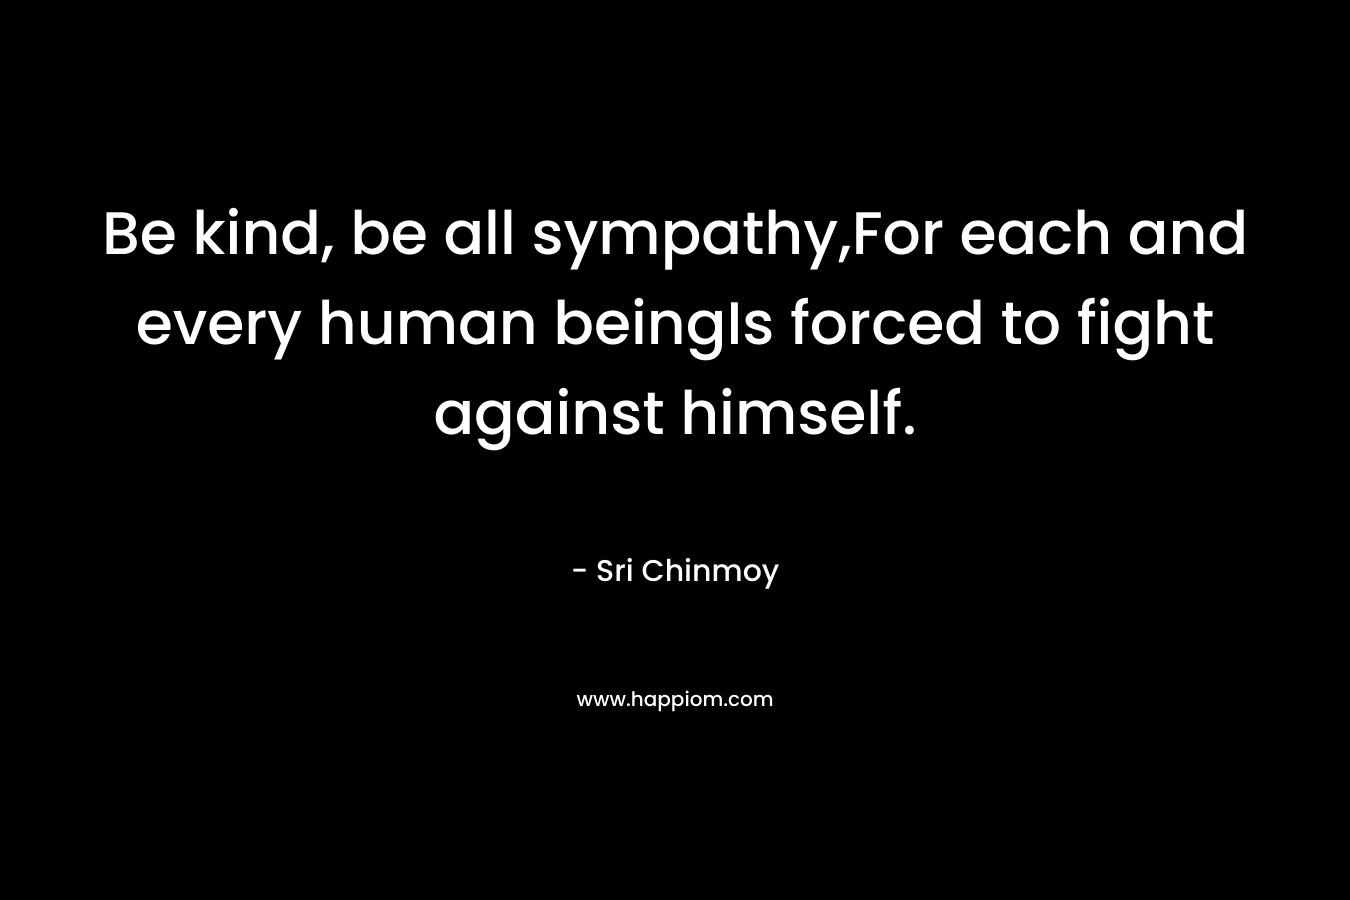 Be kind, be all sympathy,For each and every human beingIs forced to fight against himself.